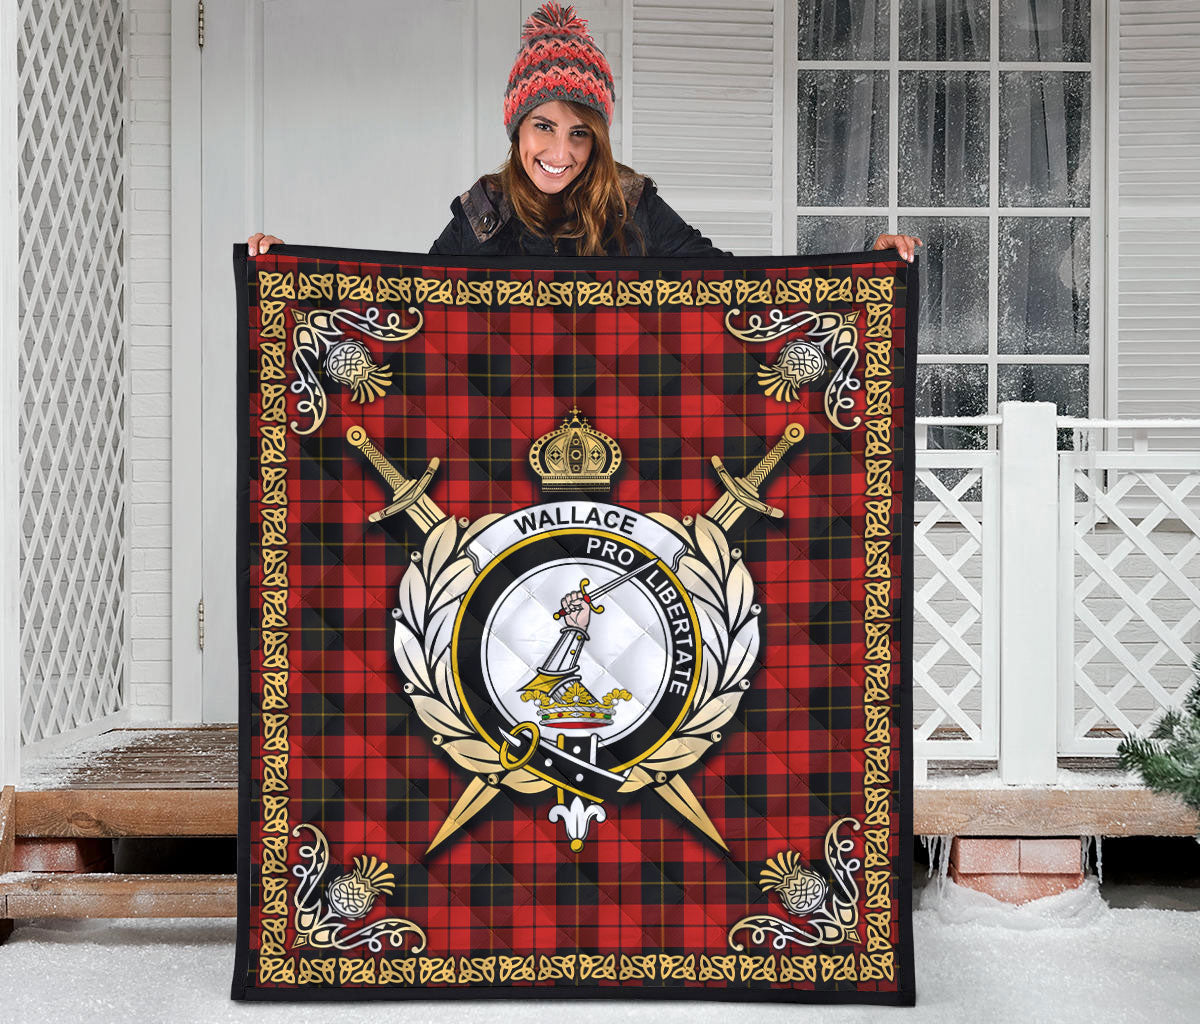 Wallace Weathered Tartan Crest Premium Quilt - Celtic Thistle Style